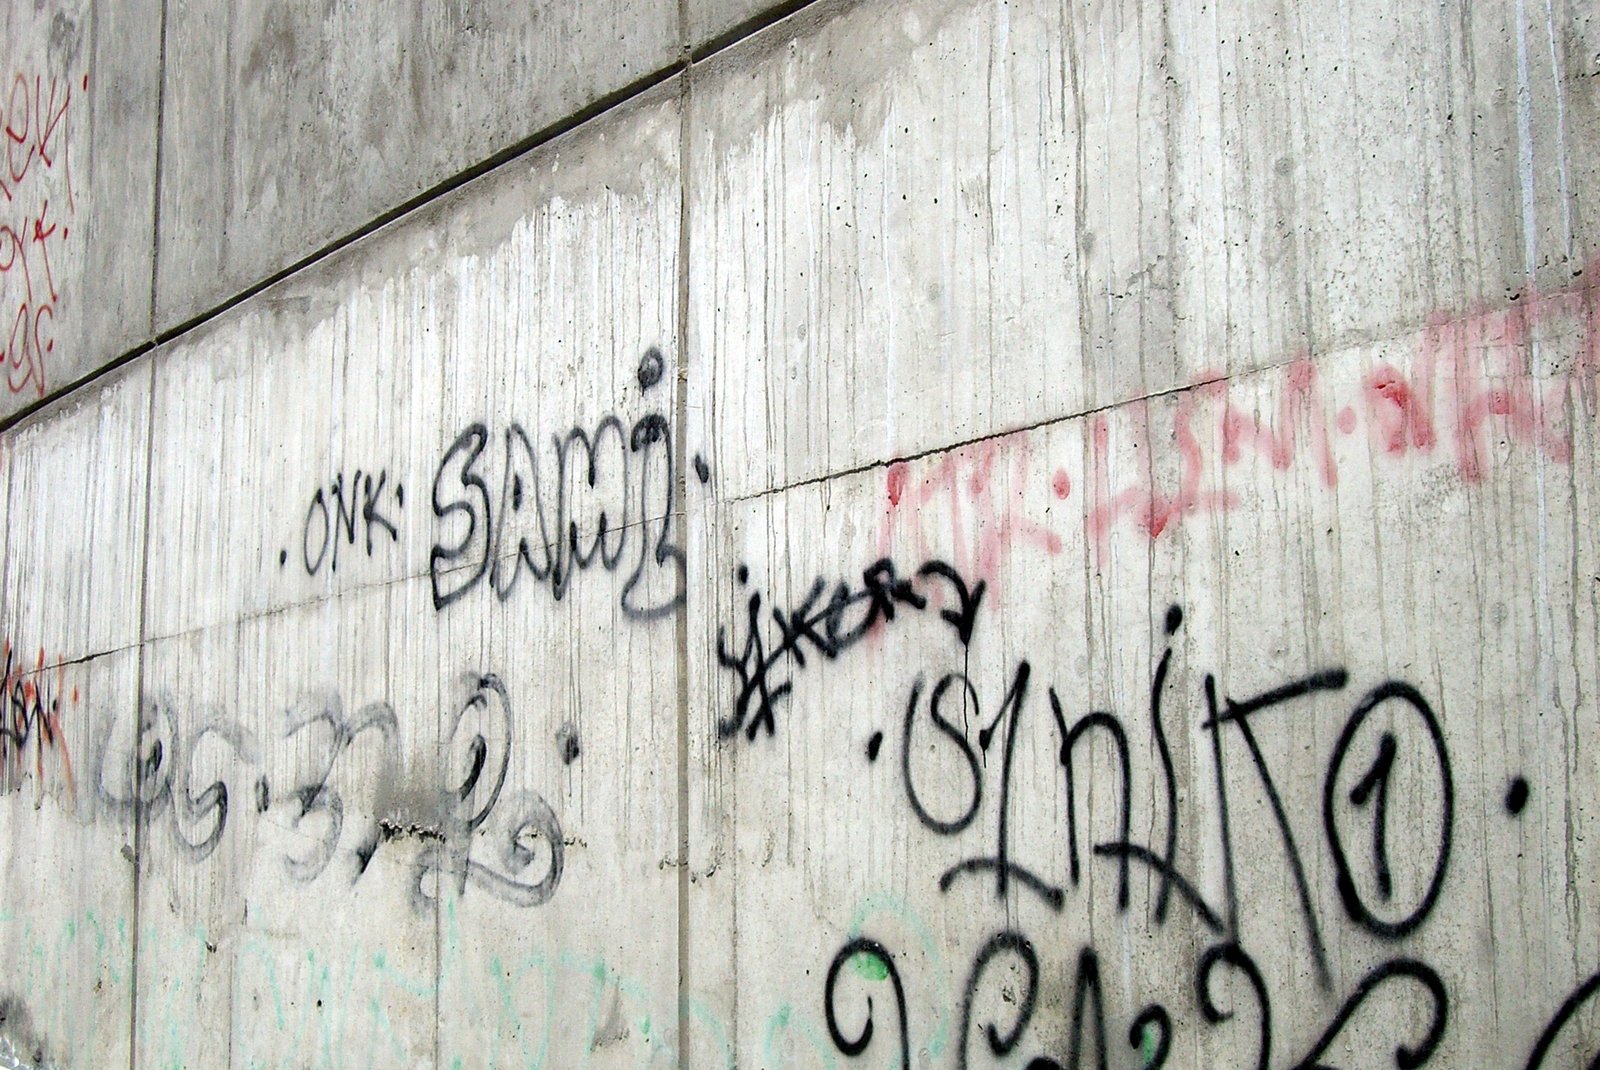 a wall is covered with various graffiti written on it